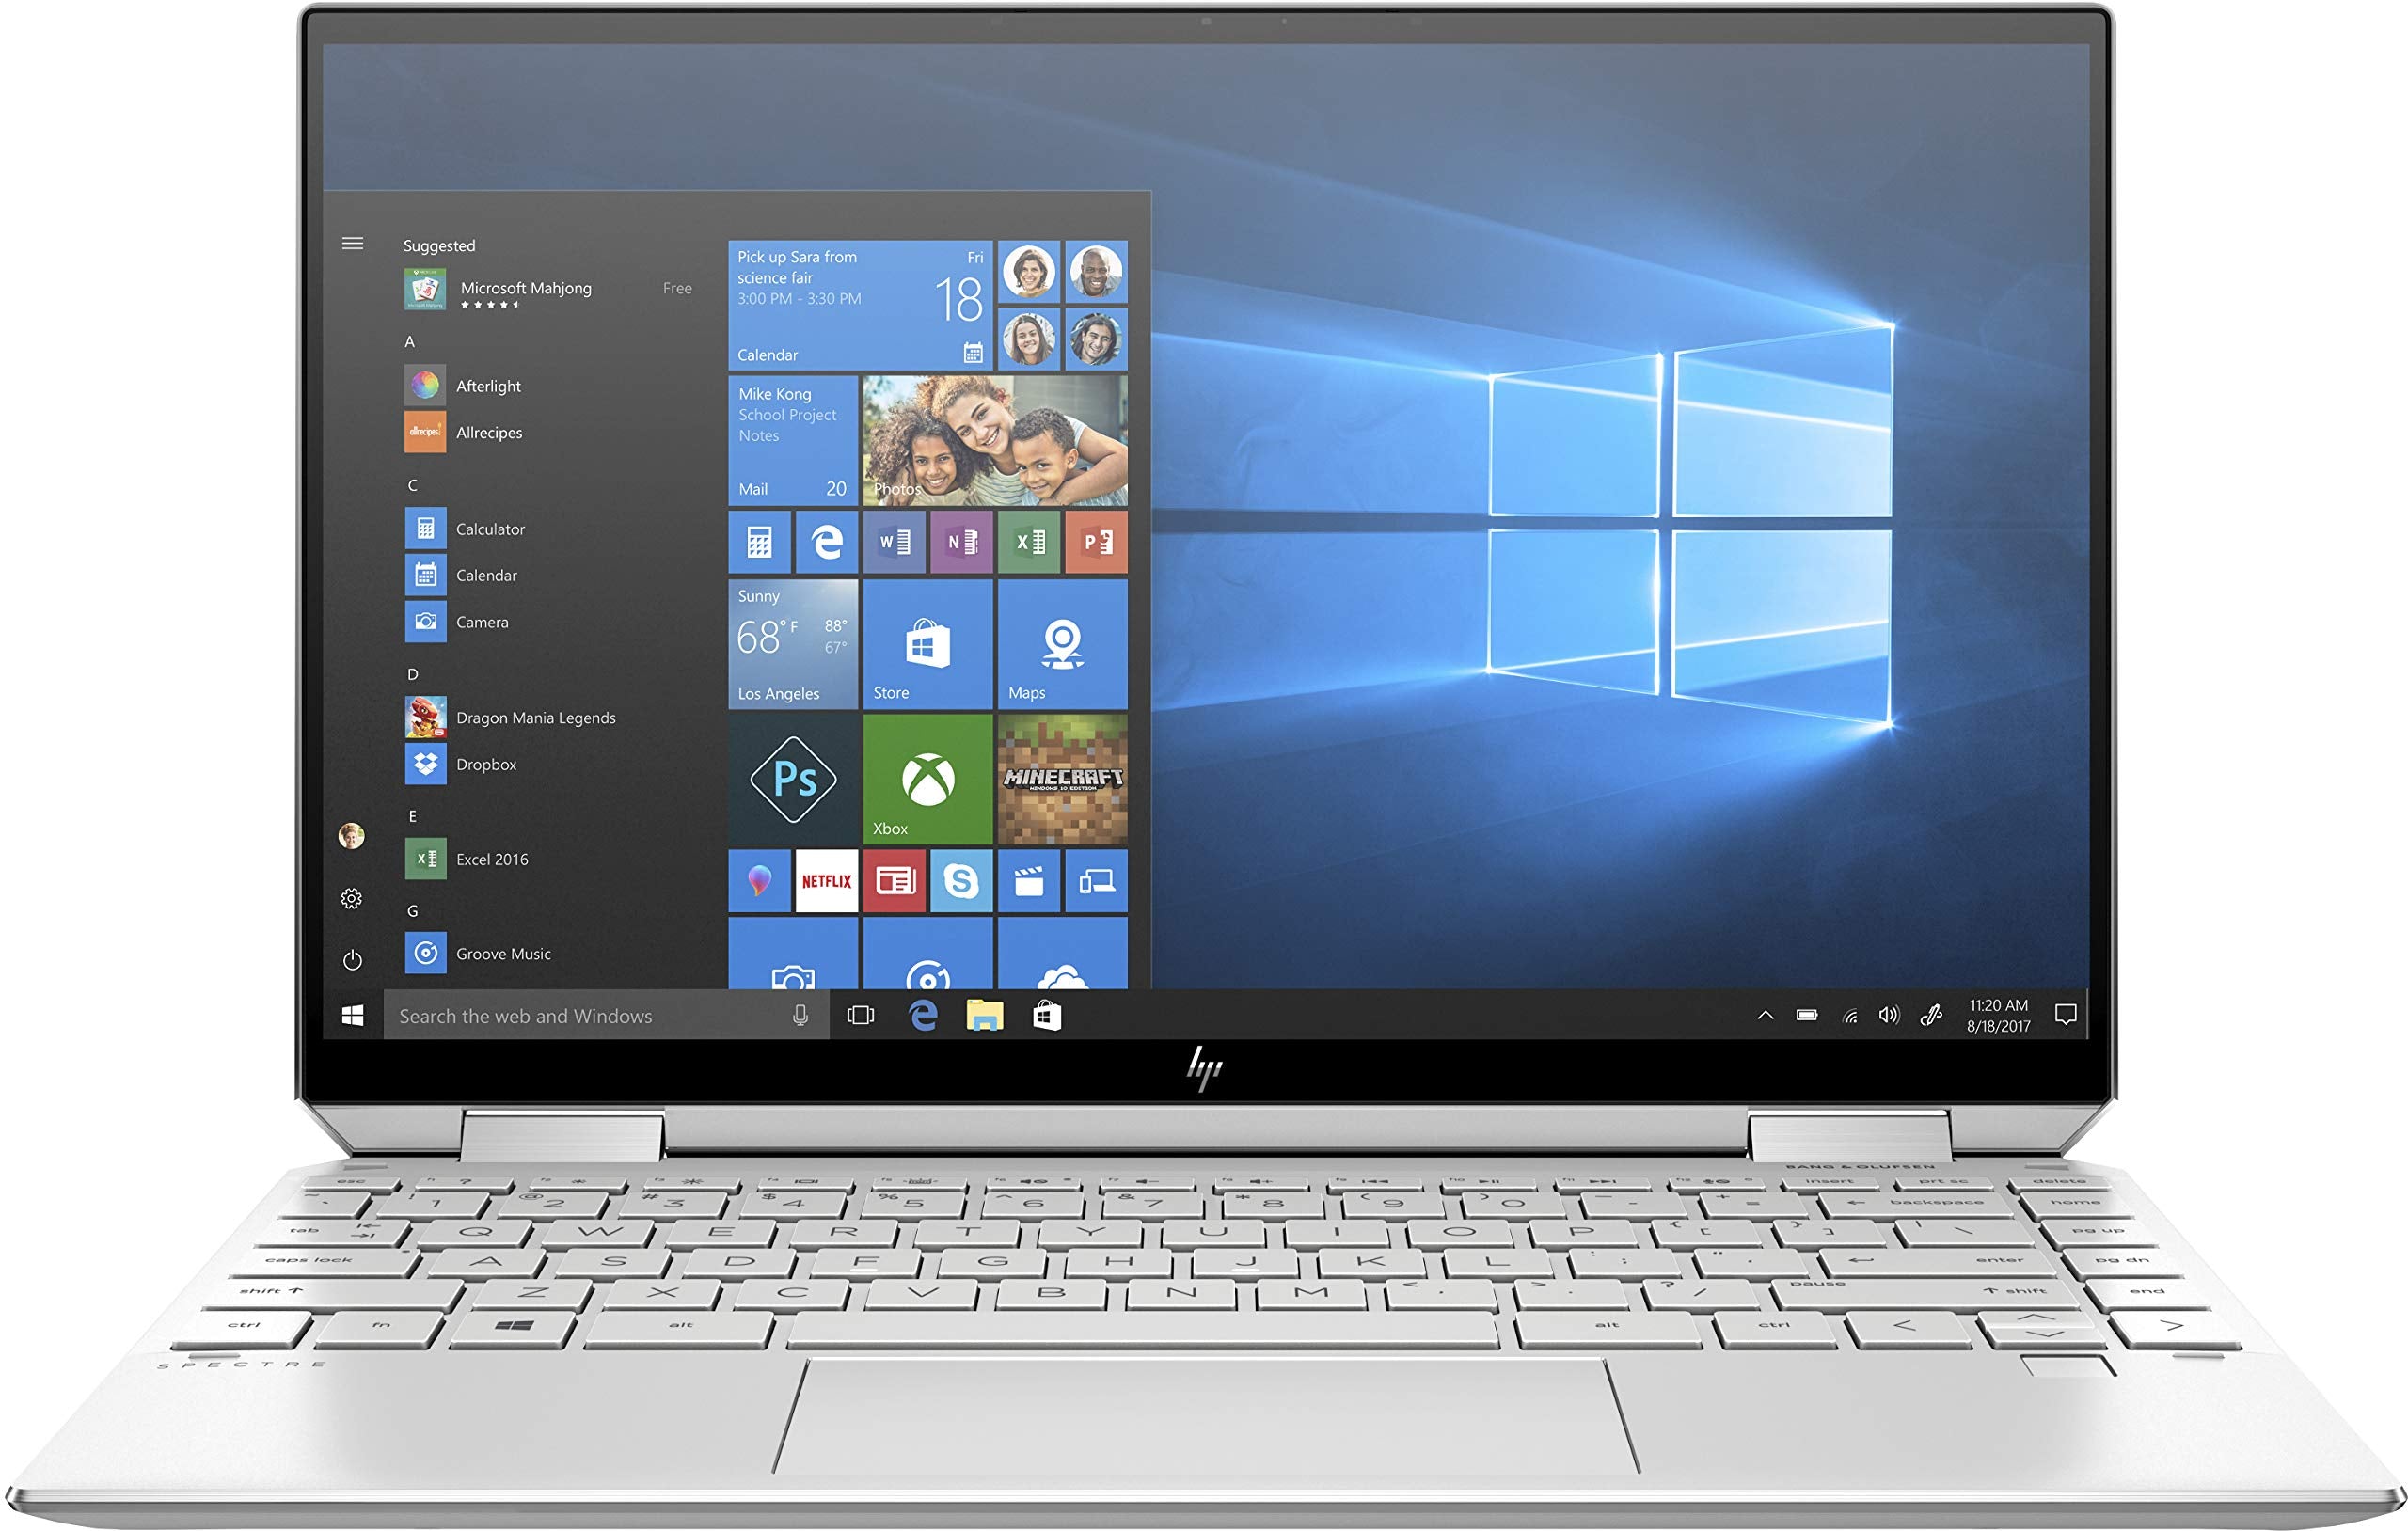 HP Spectre x360 13-aw0116na 13.3" FHD Touchscreen Hybrid 2-in-1 Laptop - i7-1065G7, 1TB SSD, 8GB DDR4, Sure View Privacy Screen, Backlit Keys, WIFI 6 & BT 5, FREE Windows 11 Pro upgrade (Renewed)